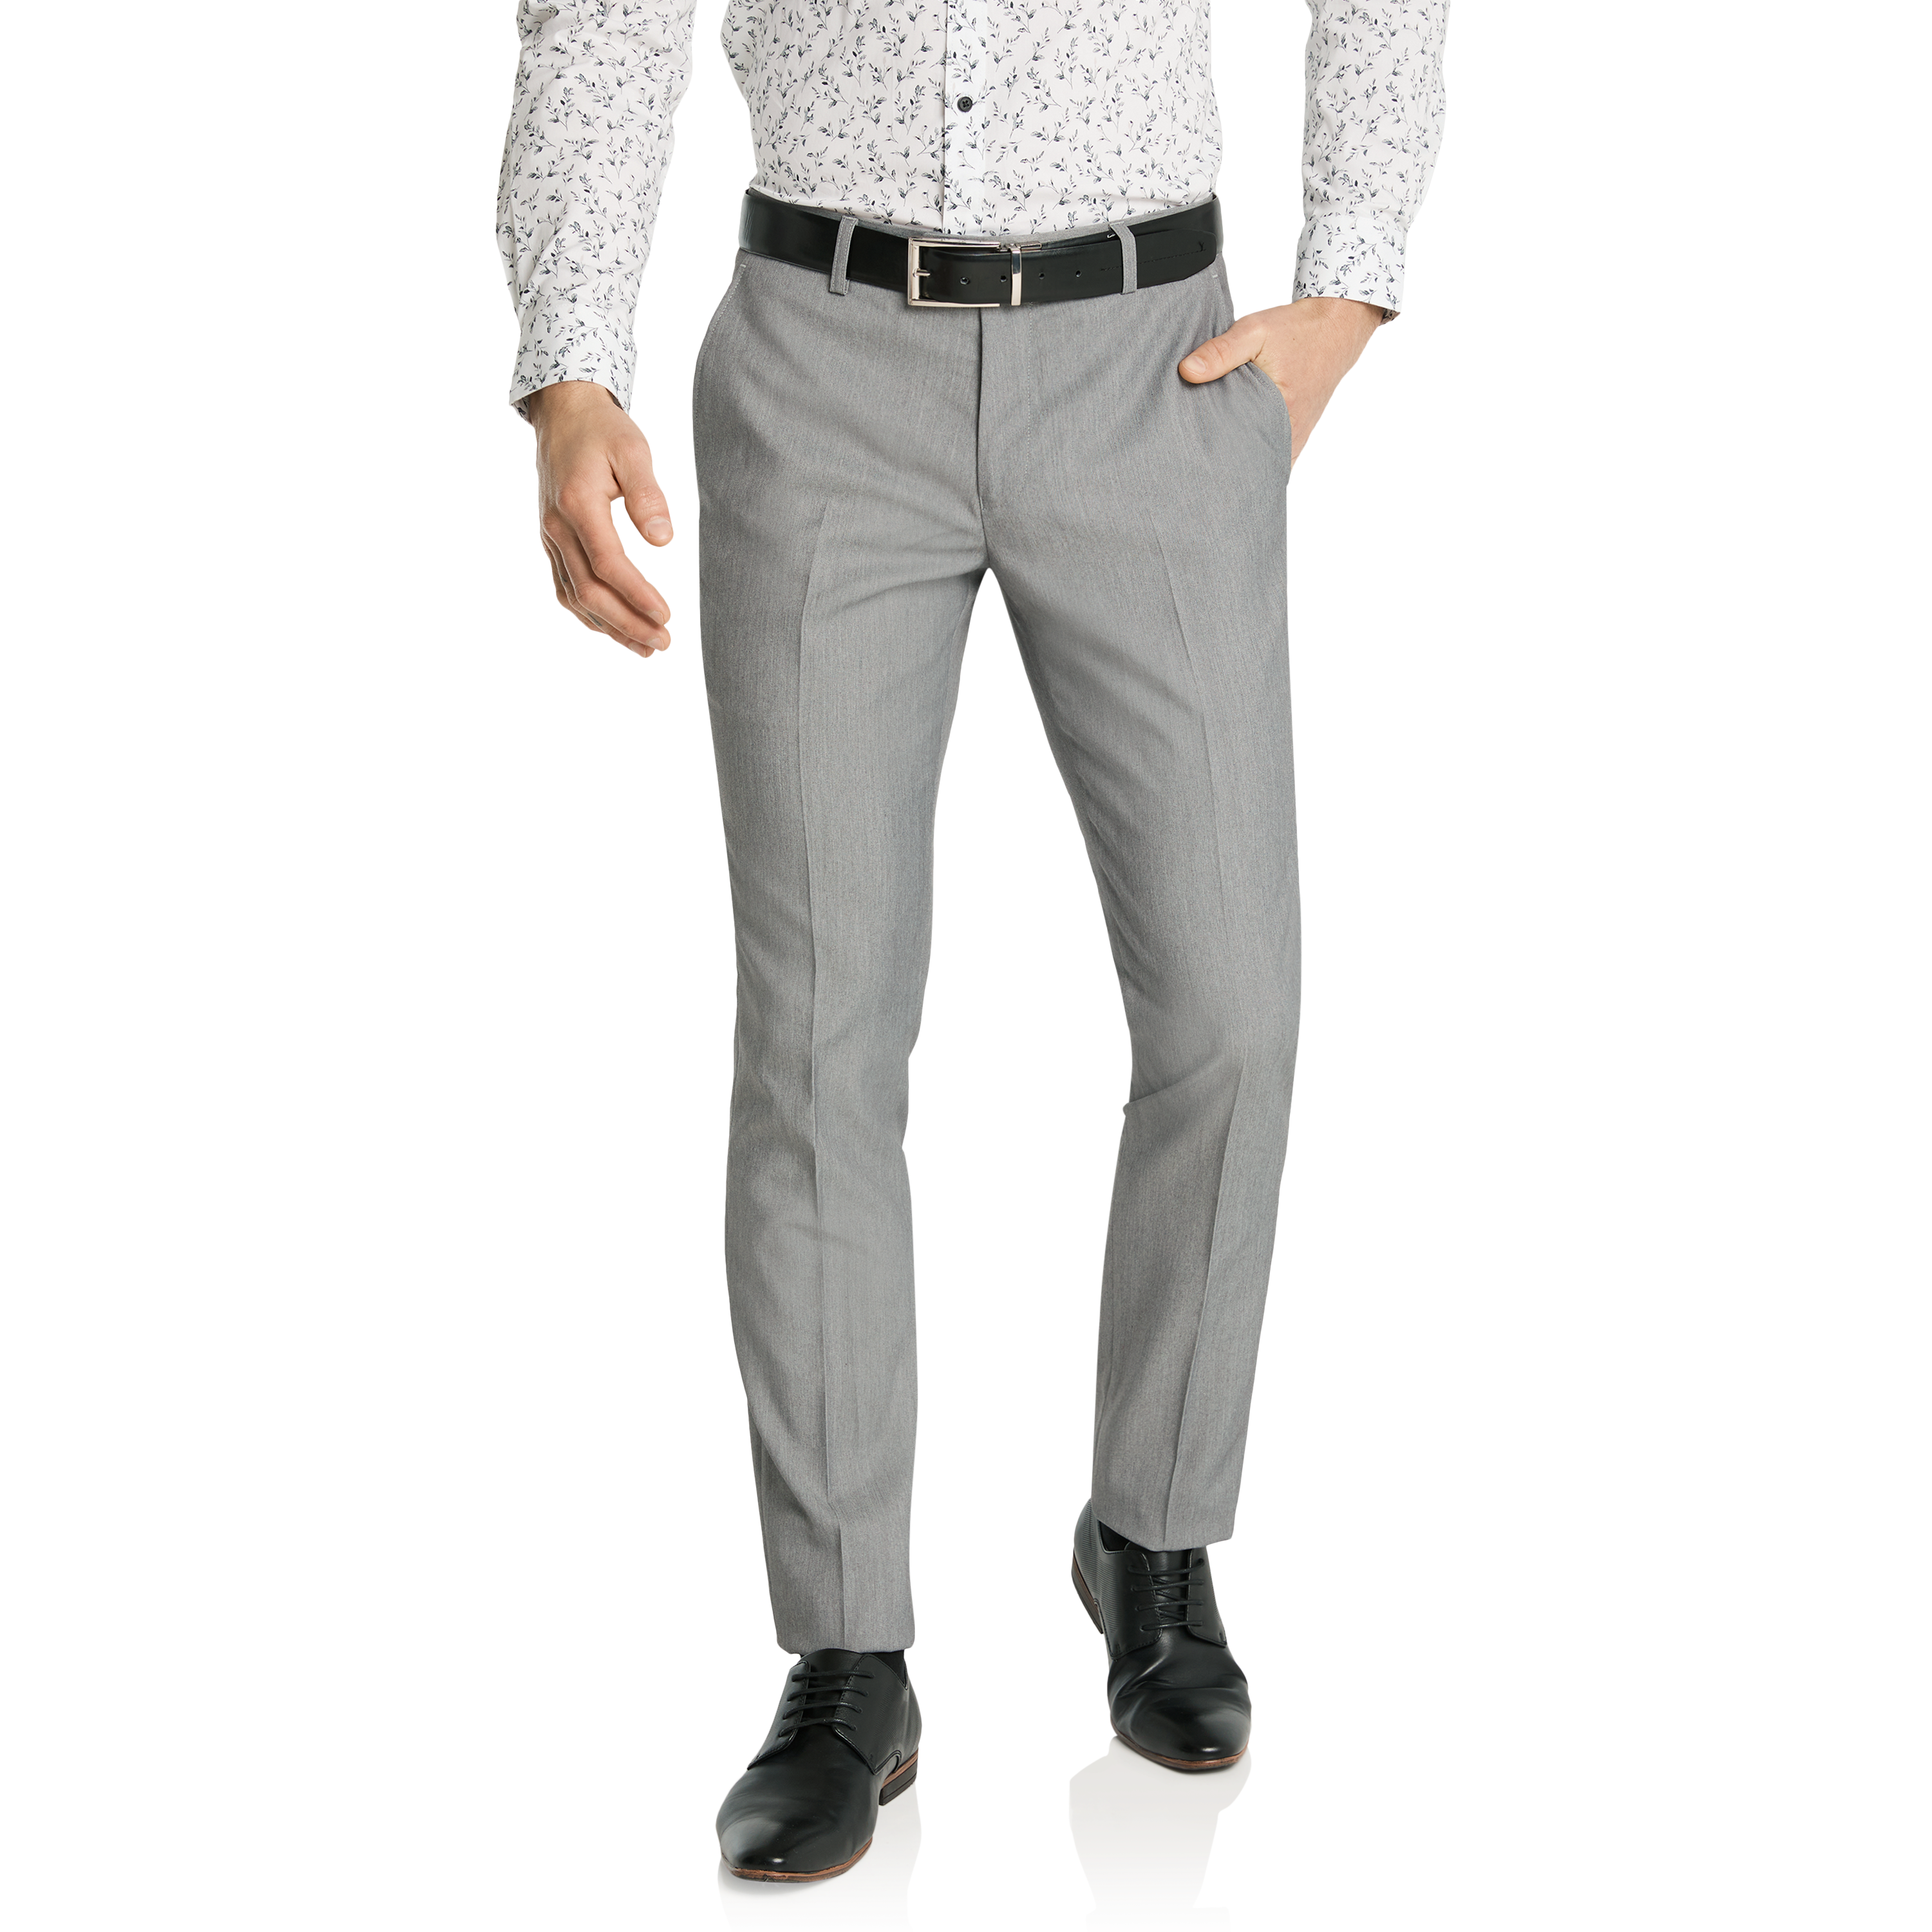 Wholesale Mens Formal Trousers Dress Pants  China Pants and Mans Pants  price  MadeinChinacom